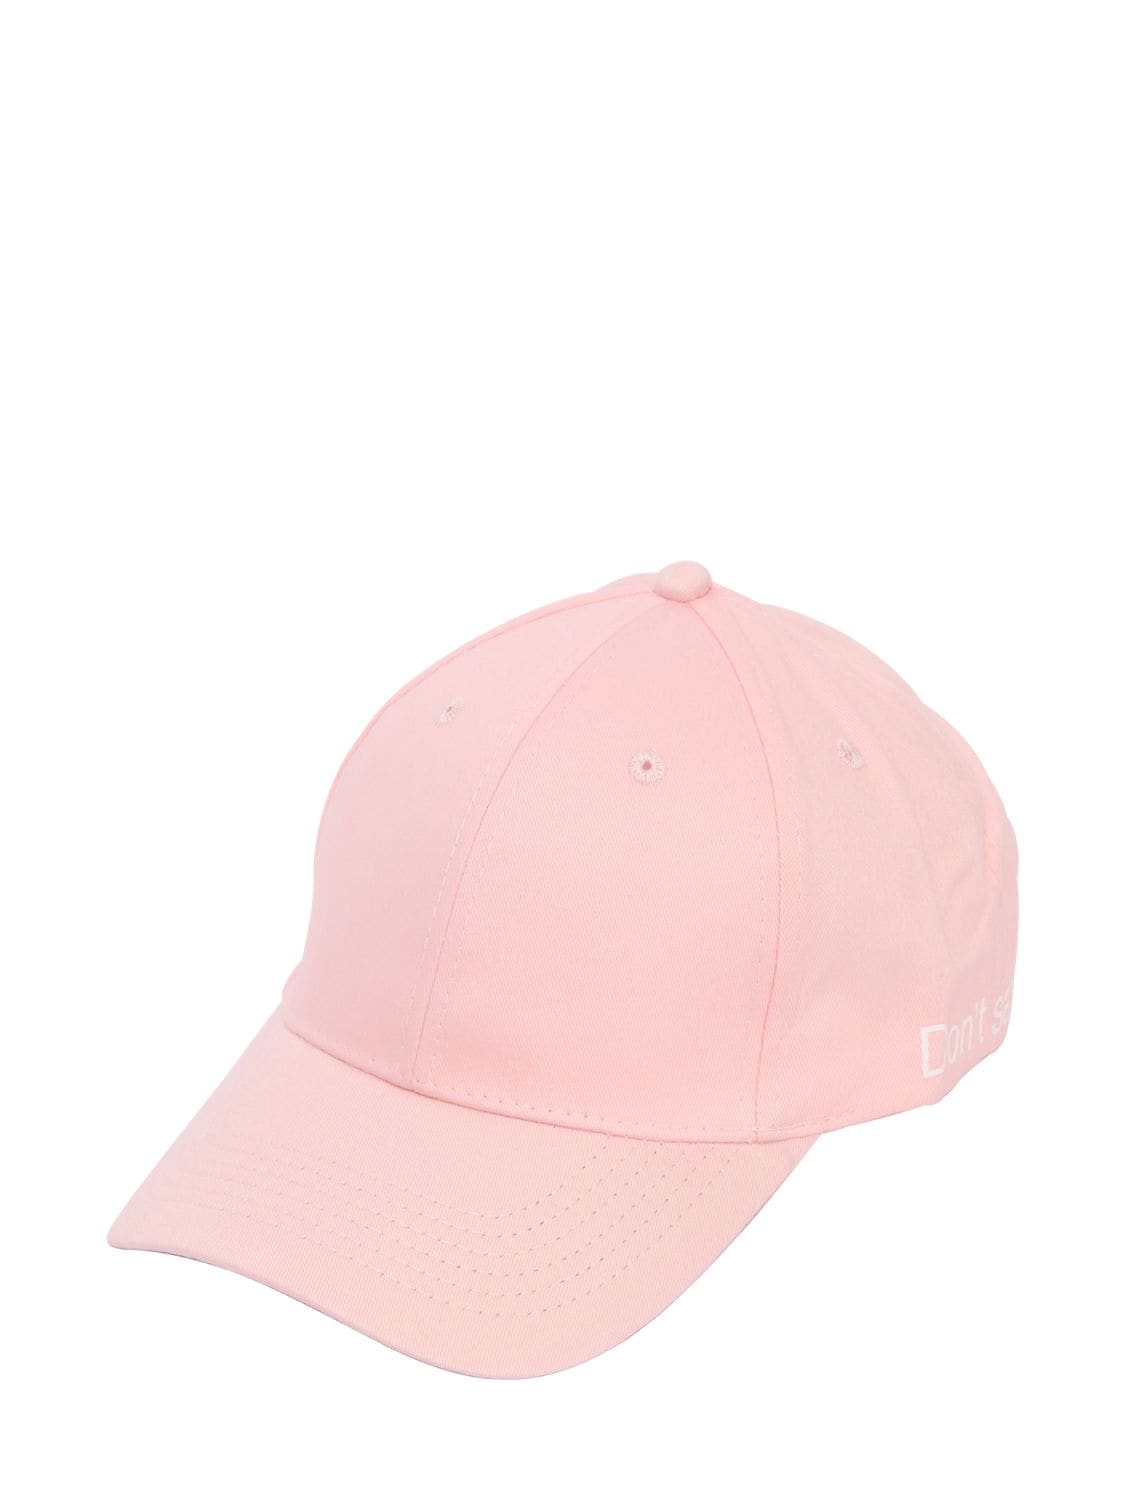 Famt - Fuck Art Make Tees I'm Not A Rapper Cotton Baseball Hat In Pink